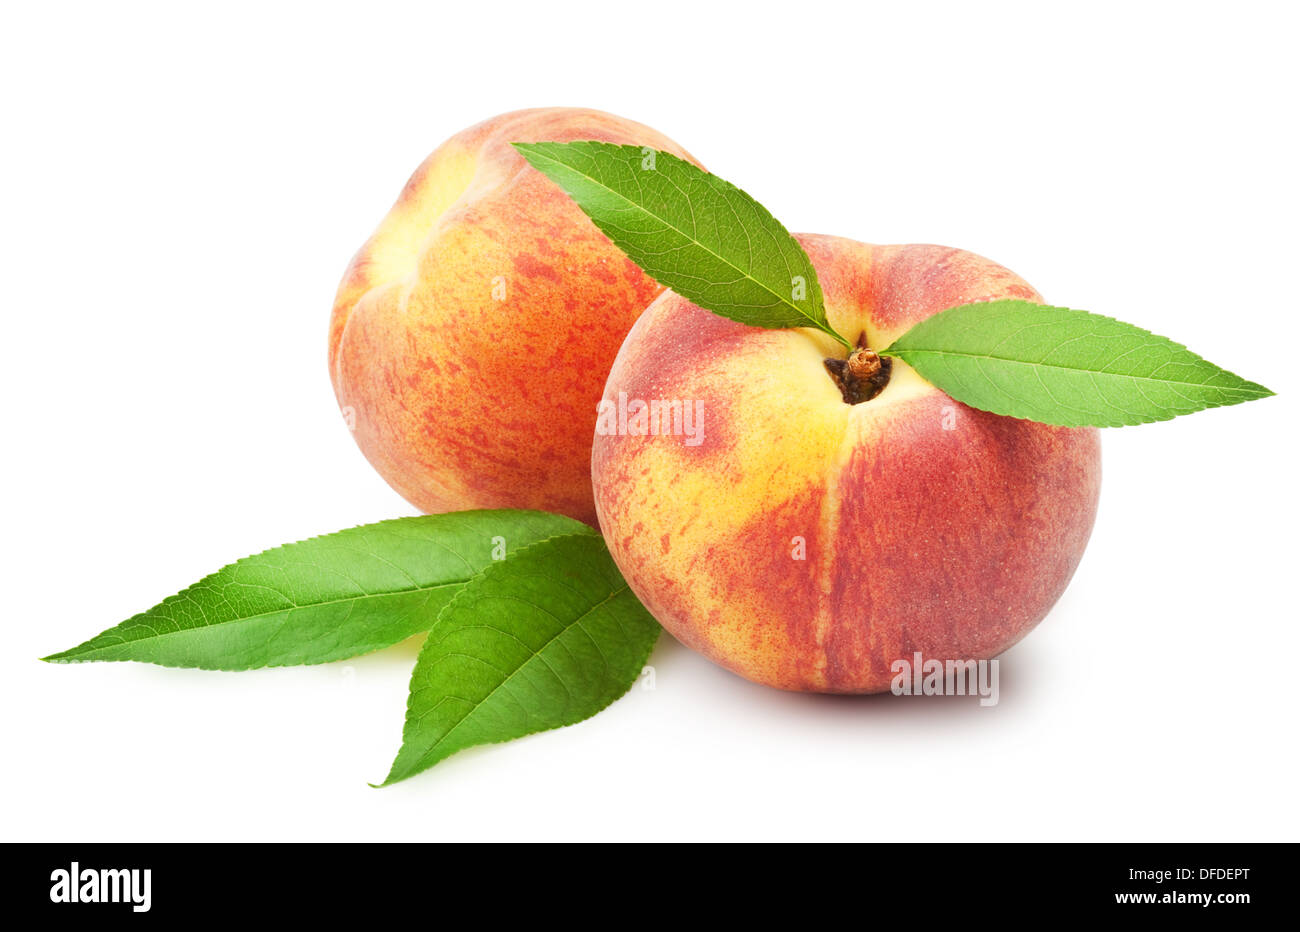 Ripe peach fruit with leaves on white background Stock Photo